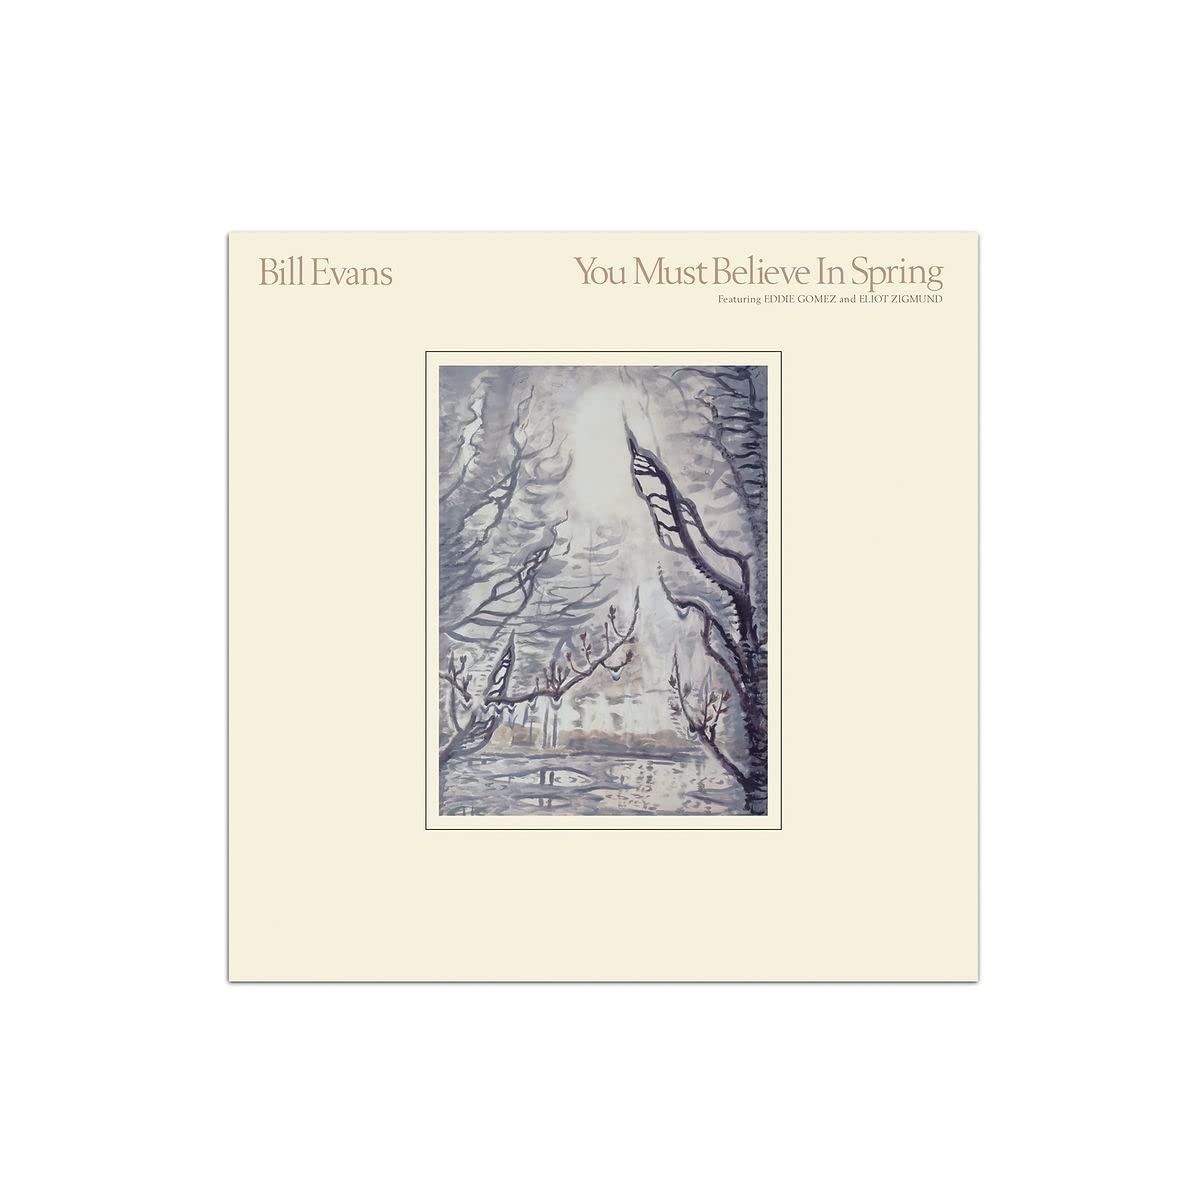 Bill Evans - You Must Believe In Spring - Audiophile 180g 2LP 45 RPM (Mastered by Kevin Gray)